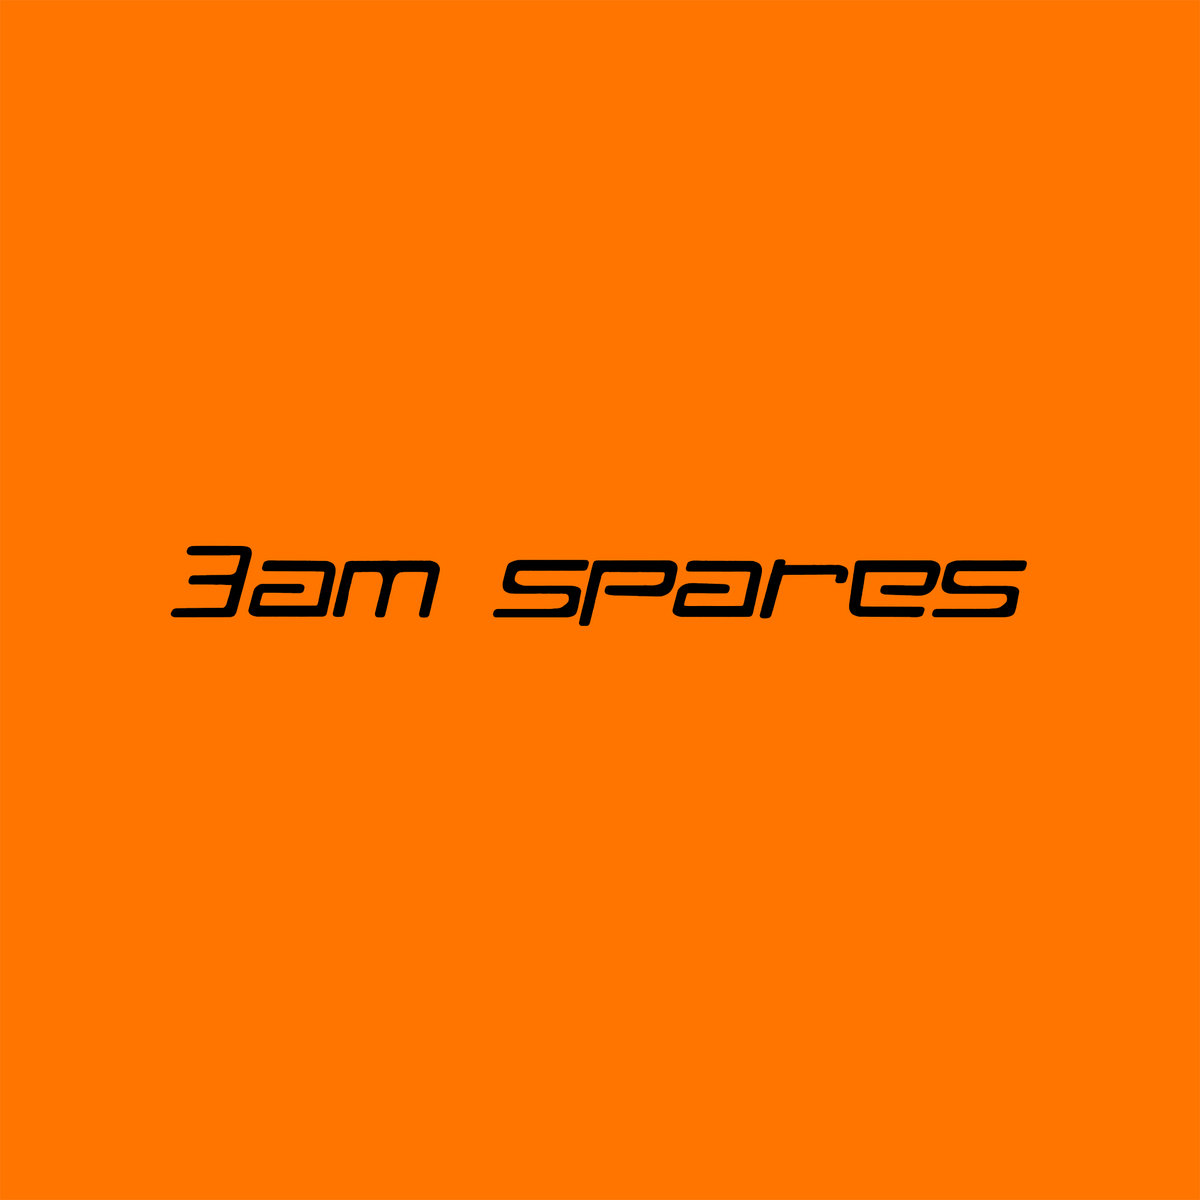 3am Spares - Resist The Beat.